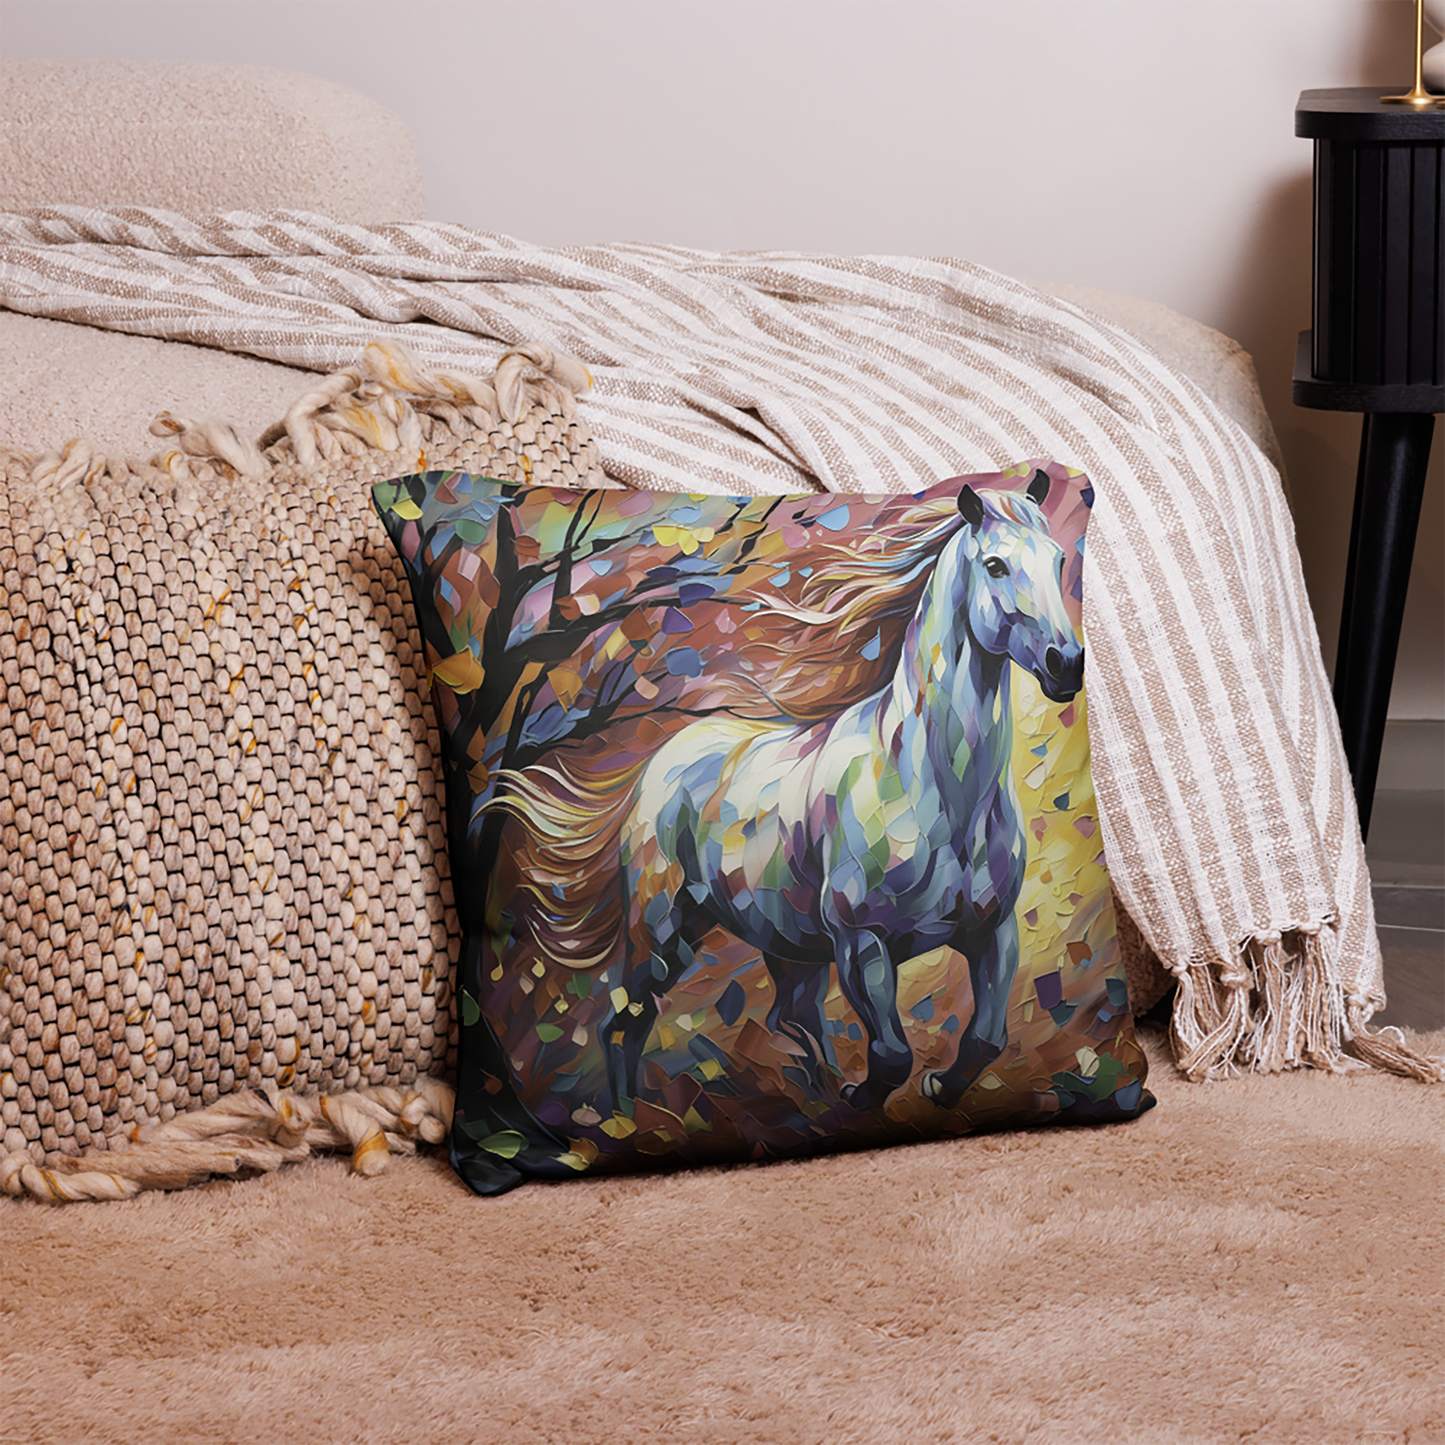 Horse Throw Pillow Multicolored Horse and Petals Polyester Decorative Cushion 18x18